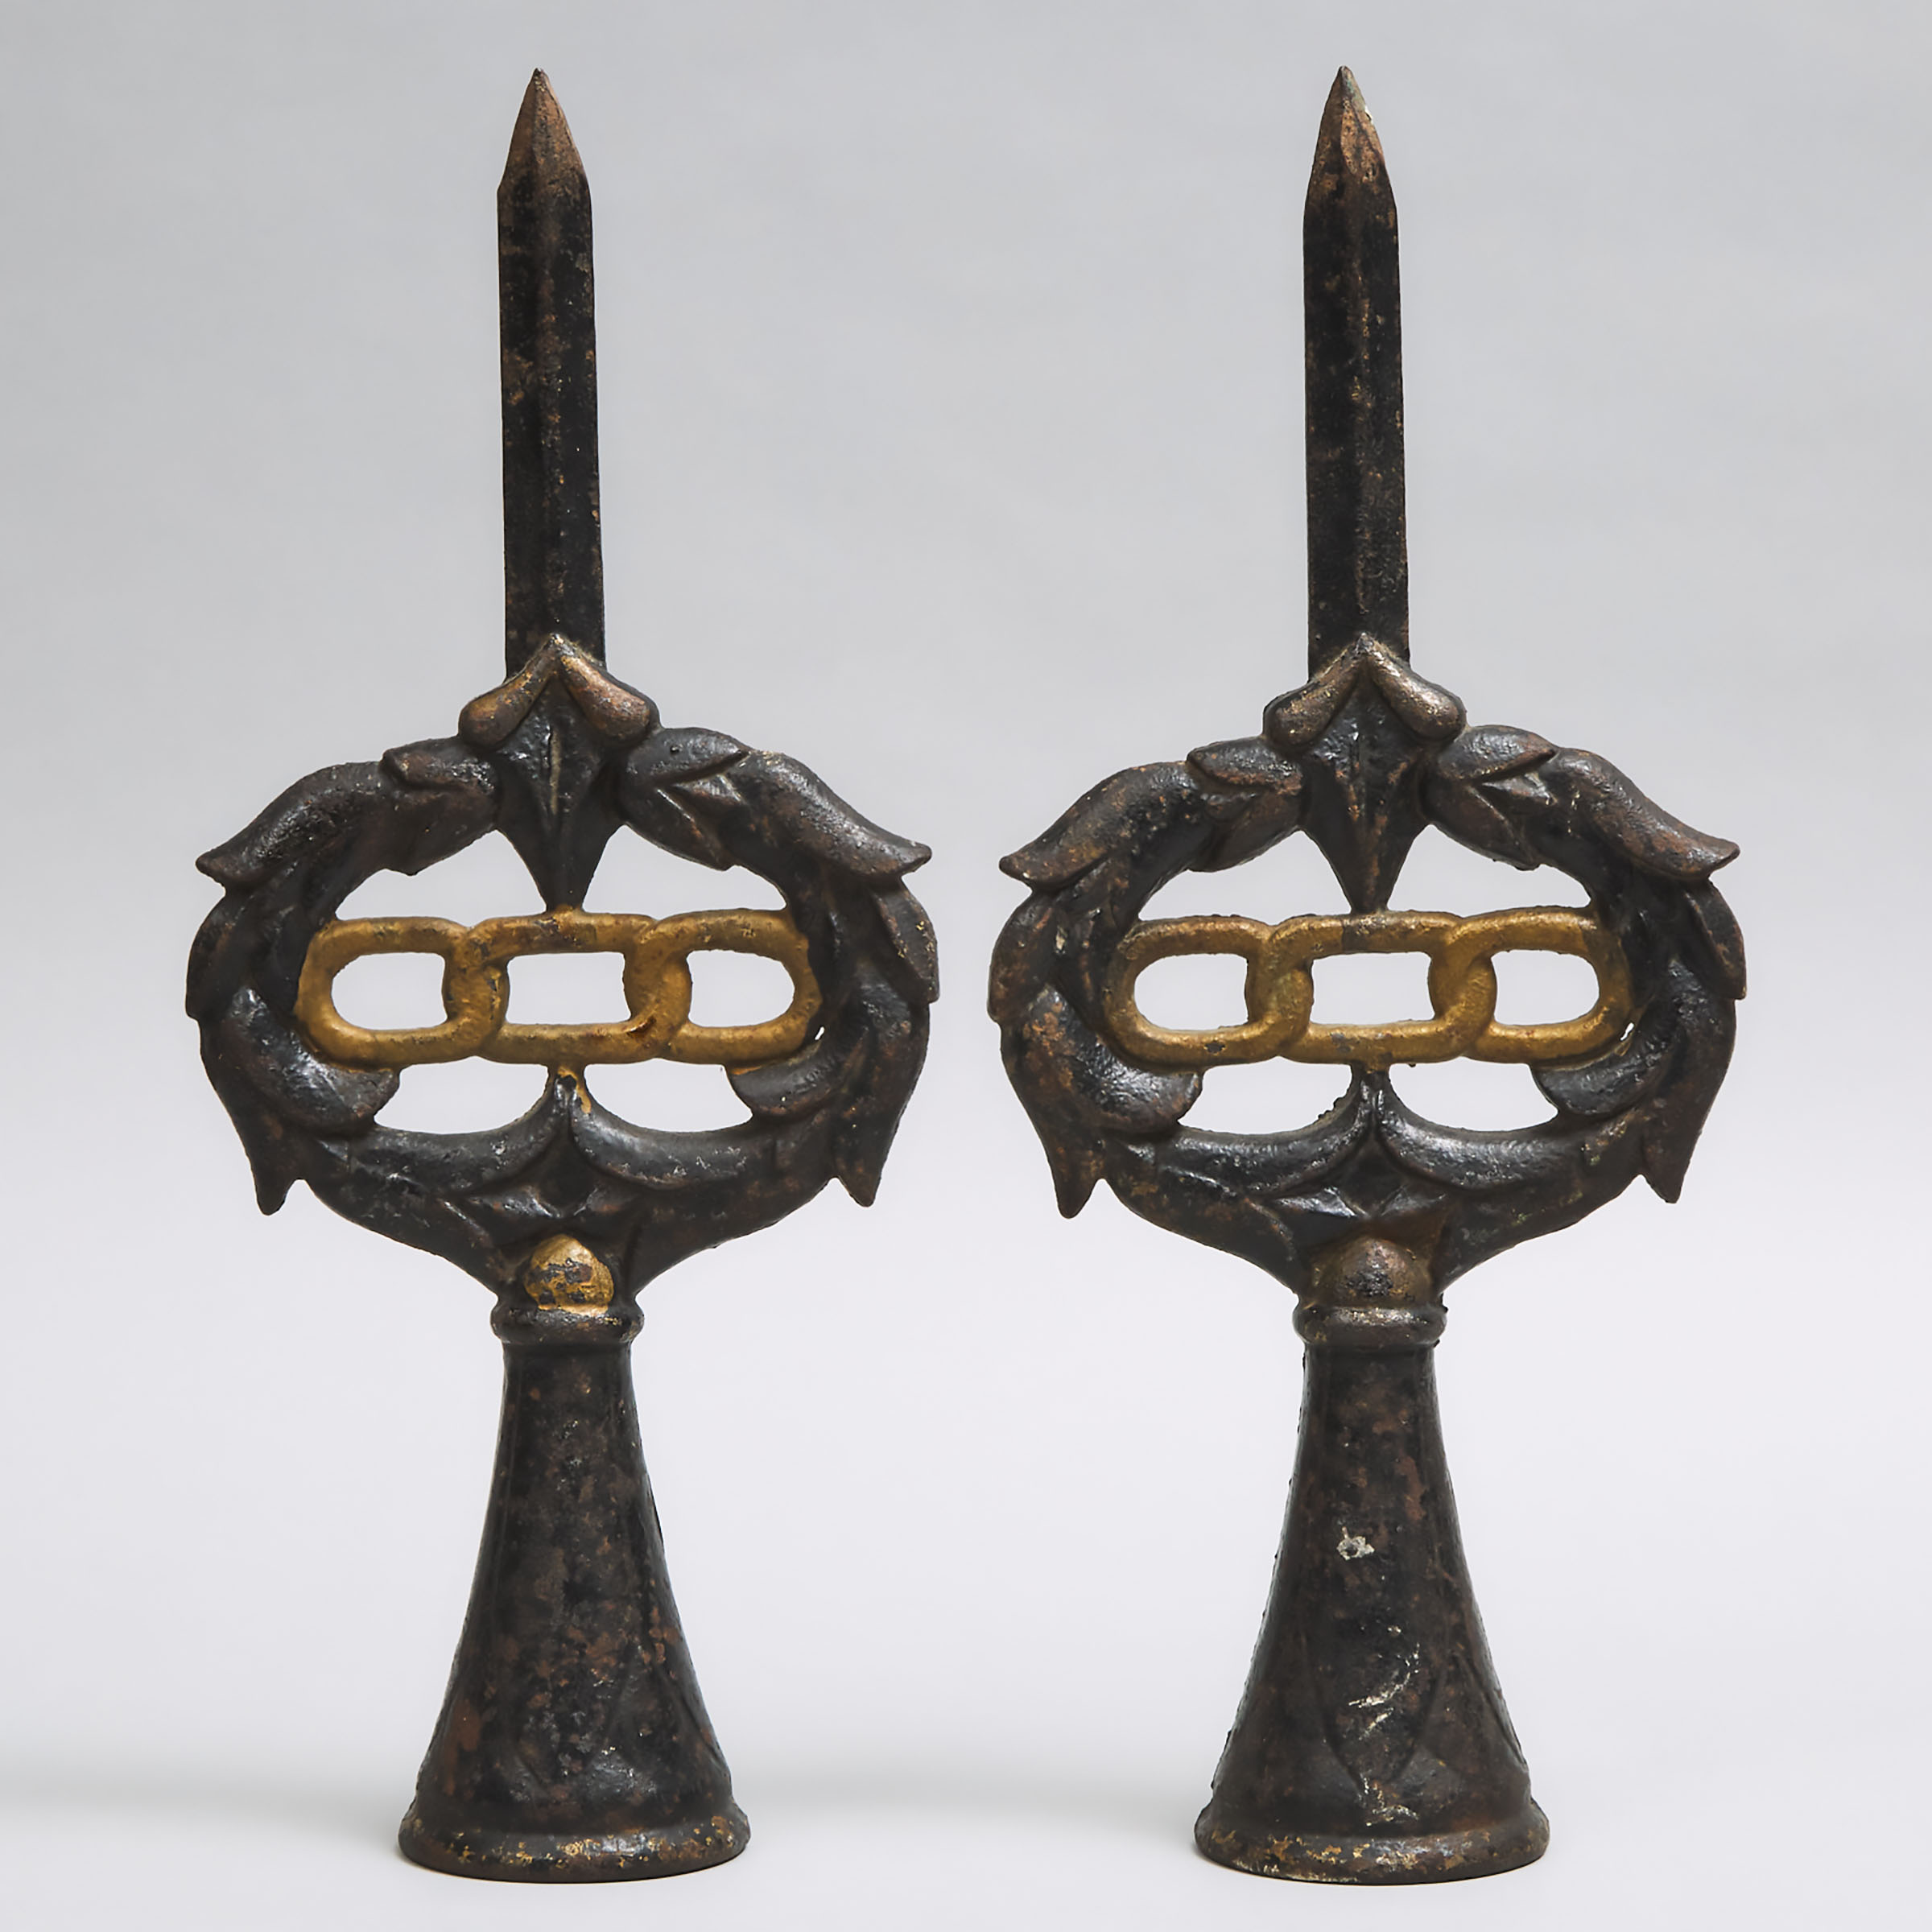 Pair of Large Victorian Oddfellows Cast Iron Finials, 19th century